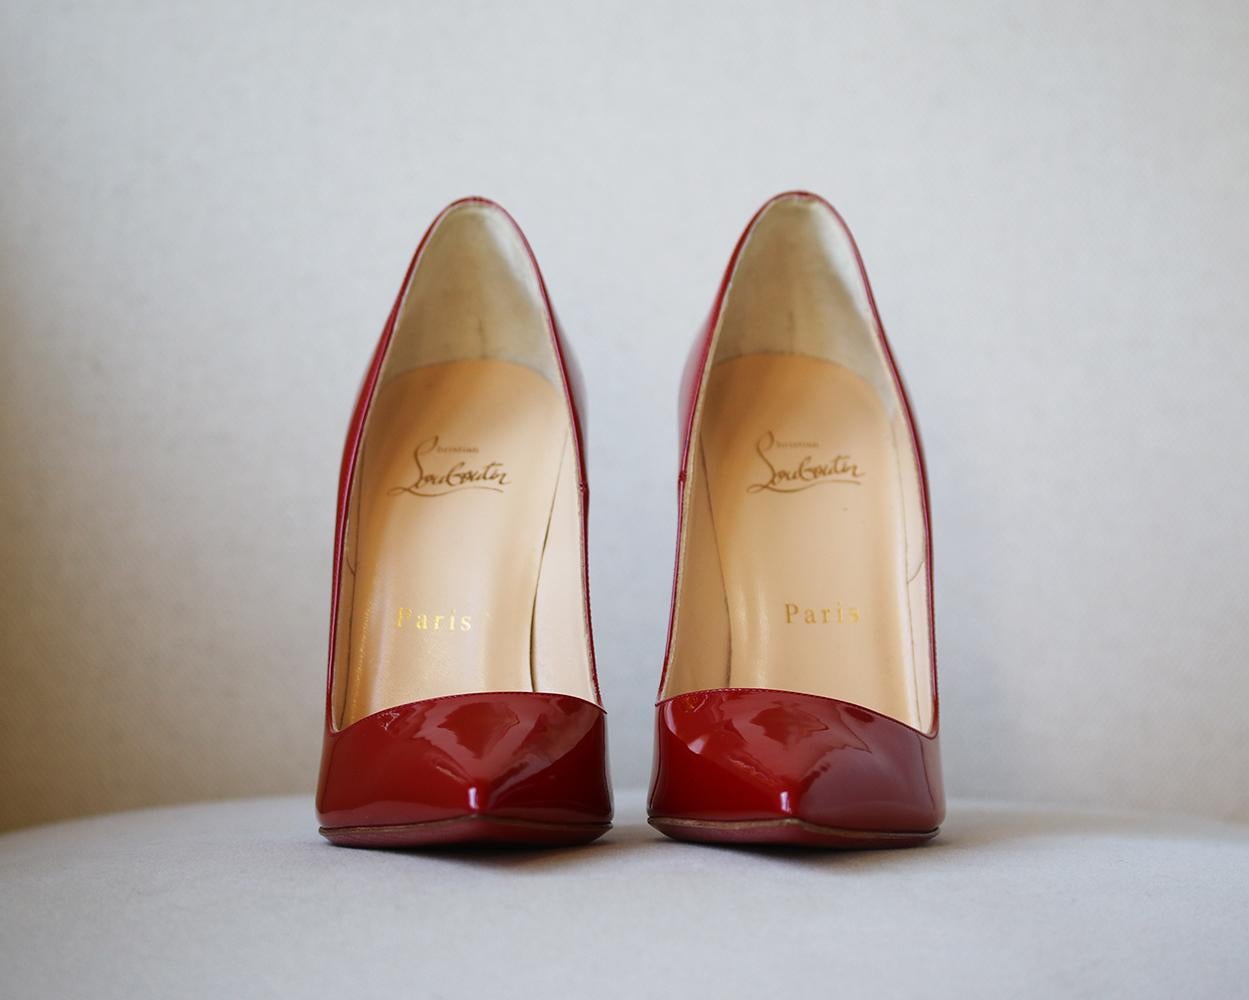 christian louboutin so kate 120 patent leather pumps